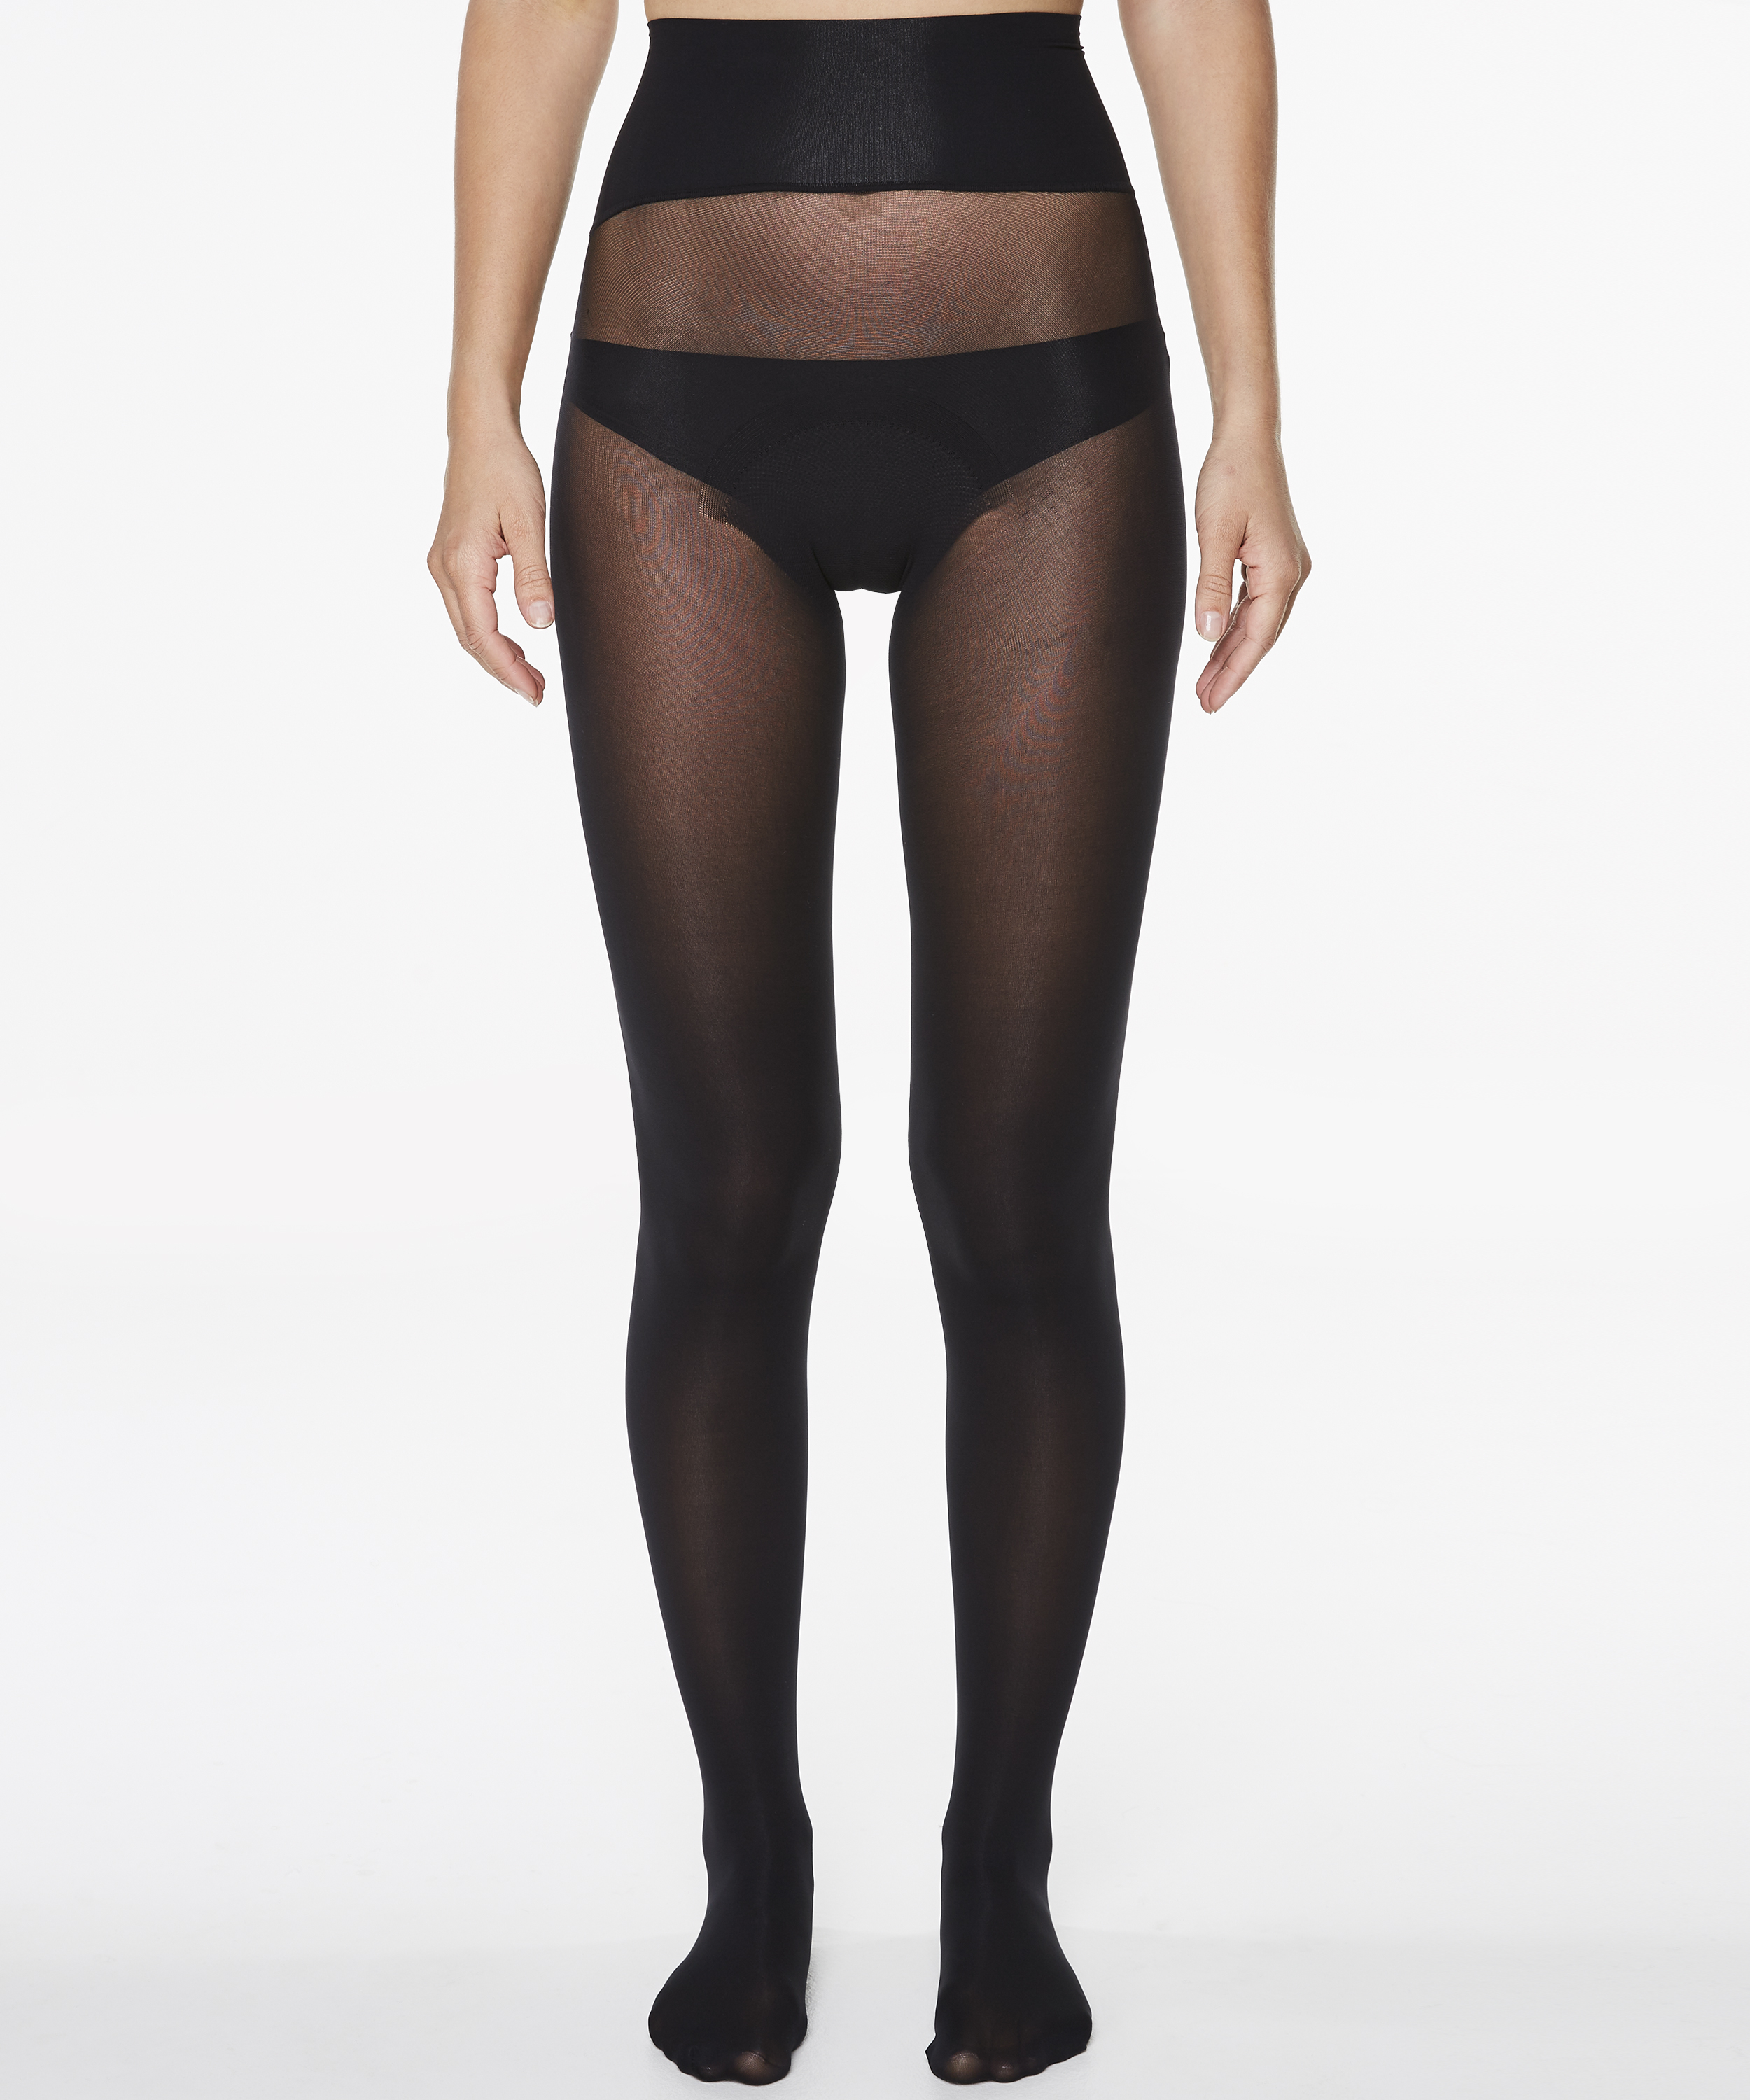 Two Pairs 40 Denier Tights for €3 - Multi-pack Collection